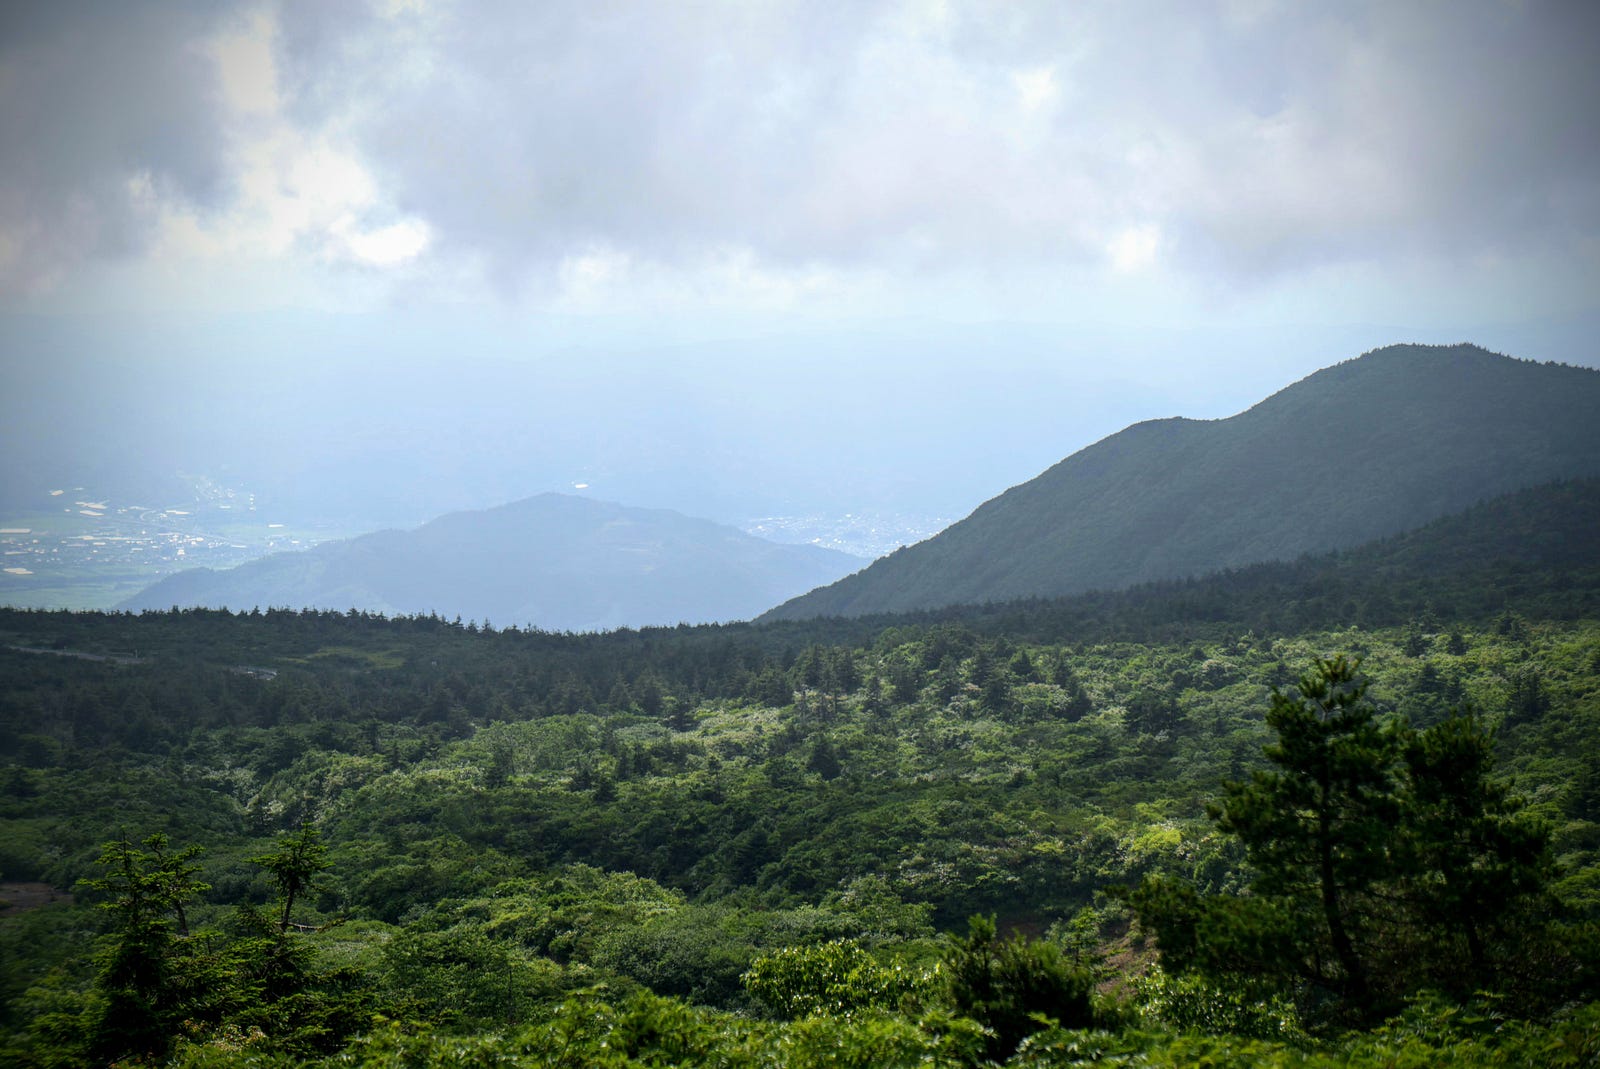 Looking towards Yamagata City from the Katta Lift of Zao-san (Mt. Zao) over the green forests and mountains, city in the distance under a cloudy sky.